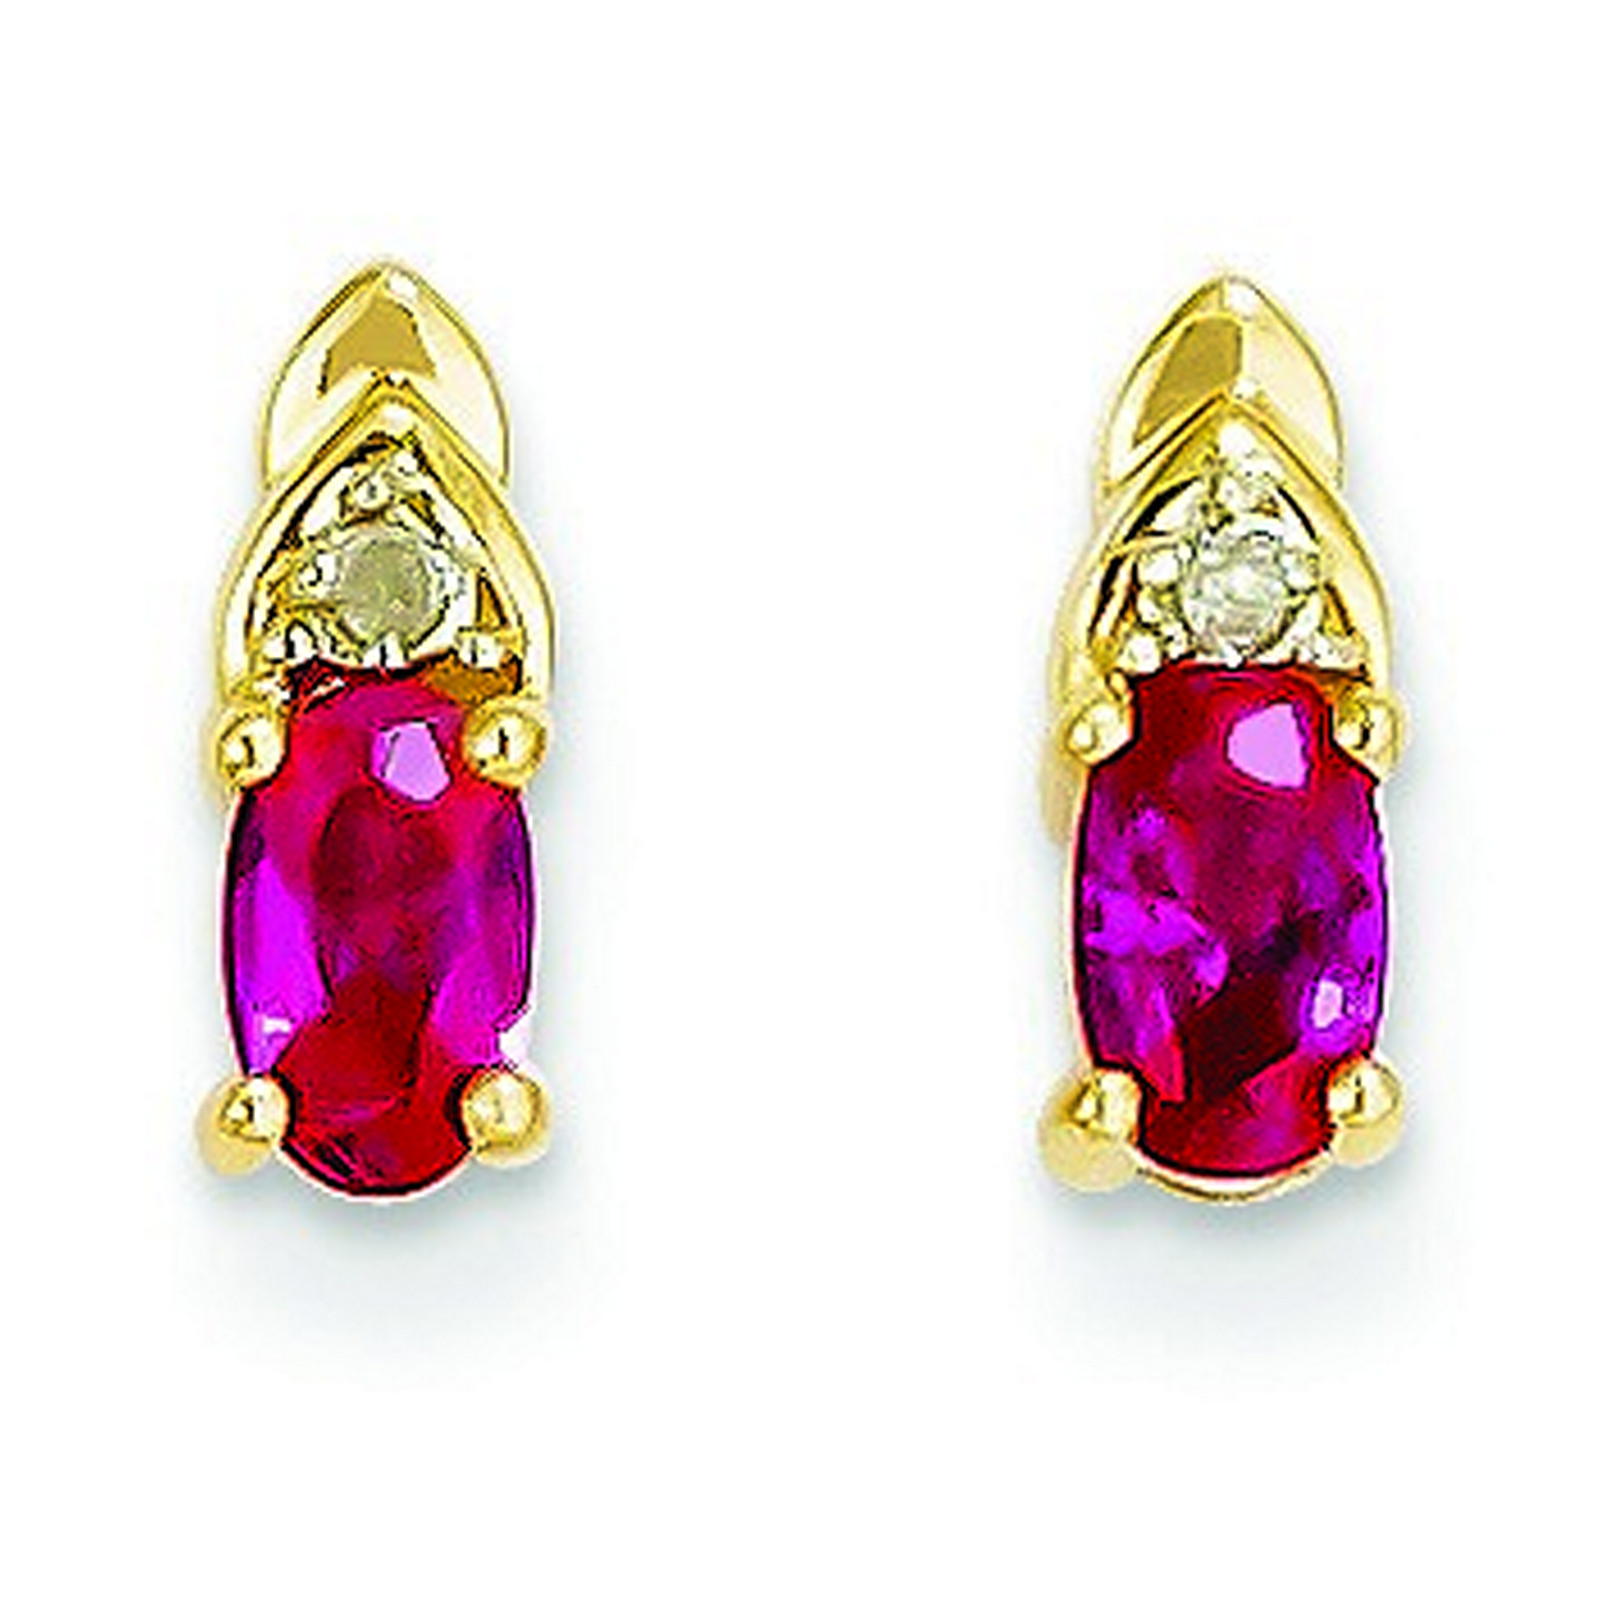 14k Yellow Gold Diamond and Genuine Ruby Earrings (3x9mm)